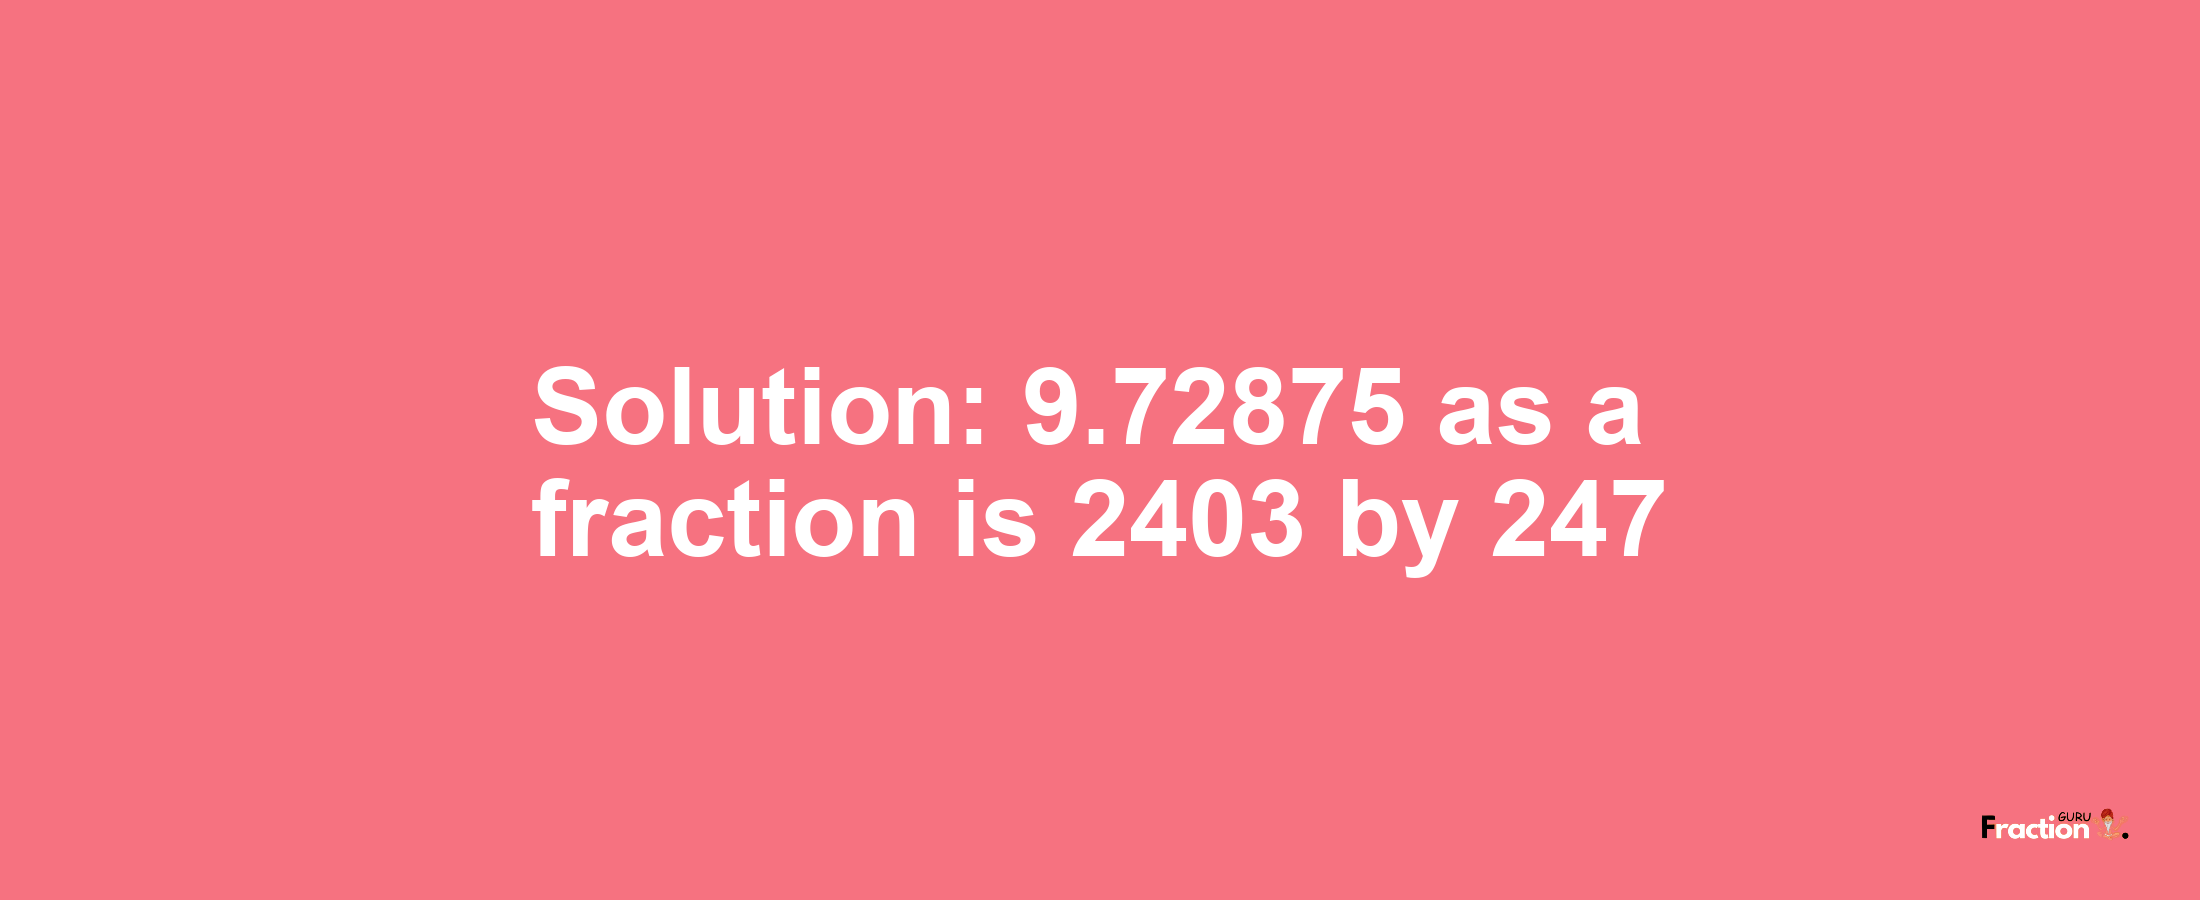 Solution:9.72875 as a fraction is 2403/247